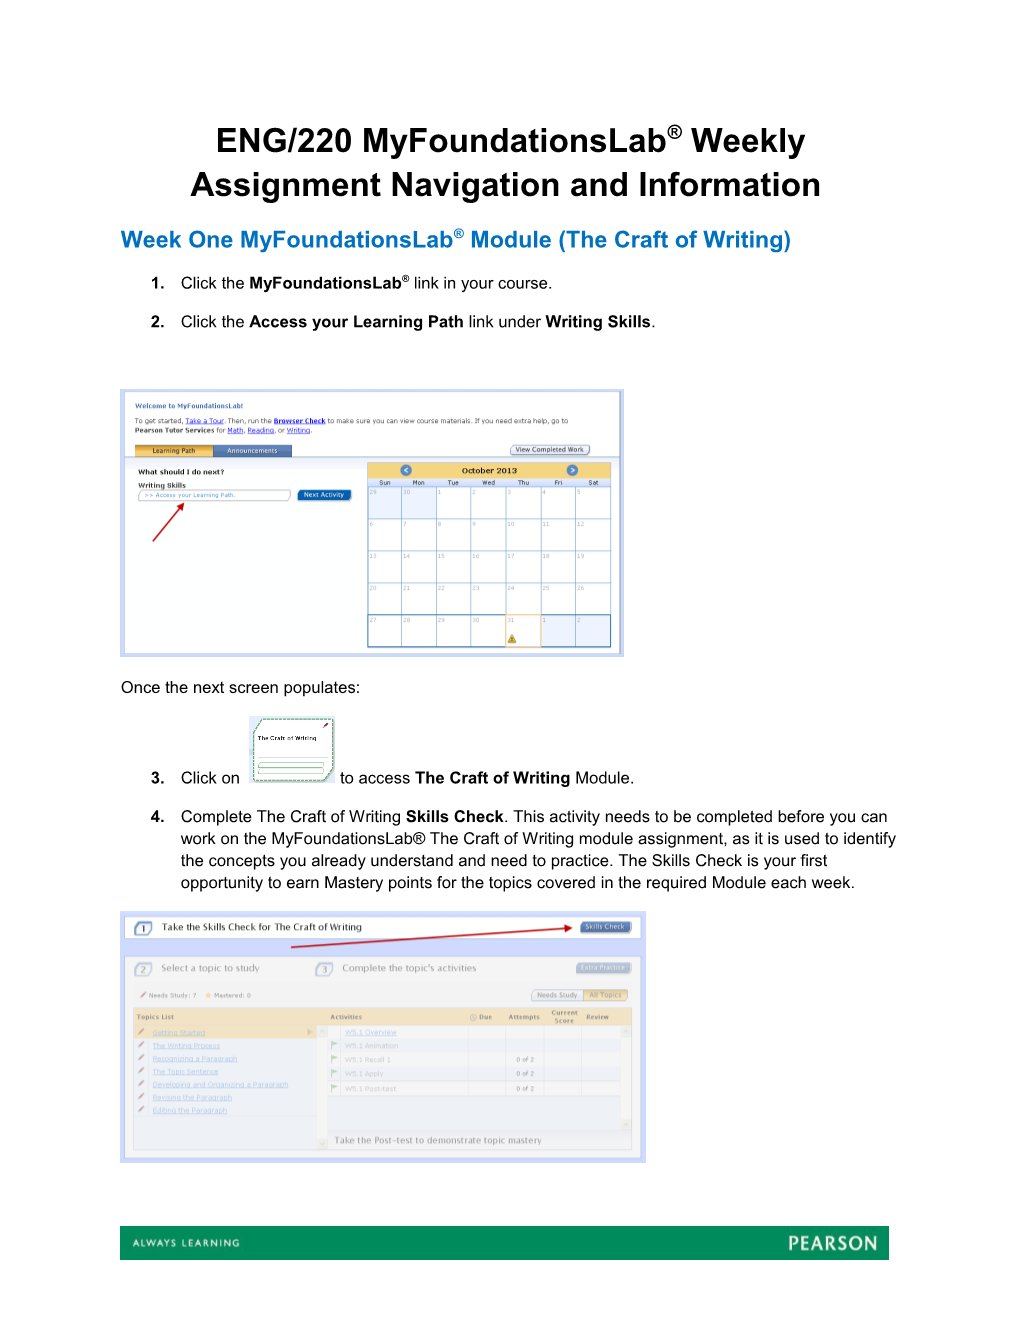 ENG/220 Myfoundationslab Weekly Assignment Navigation and Information